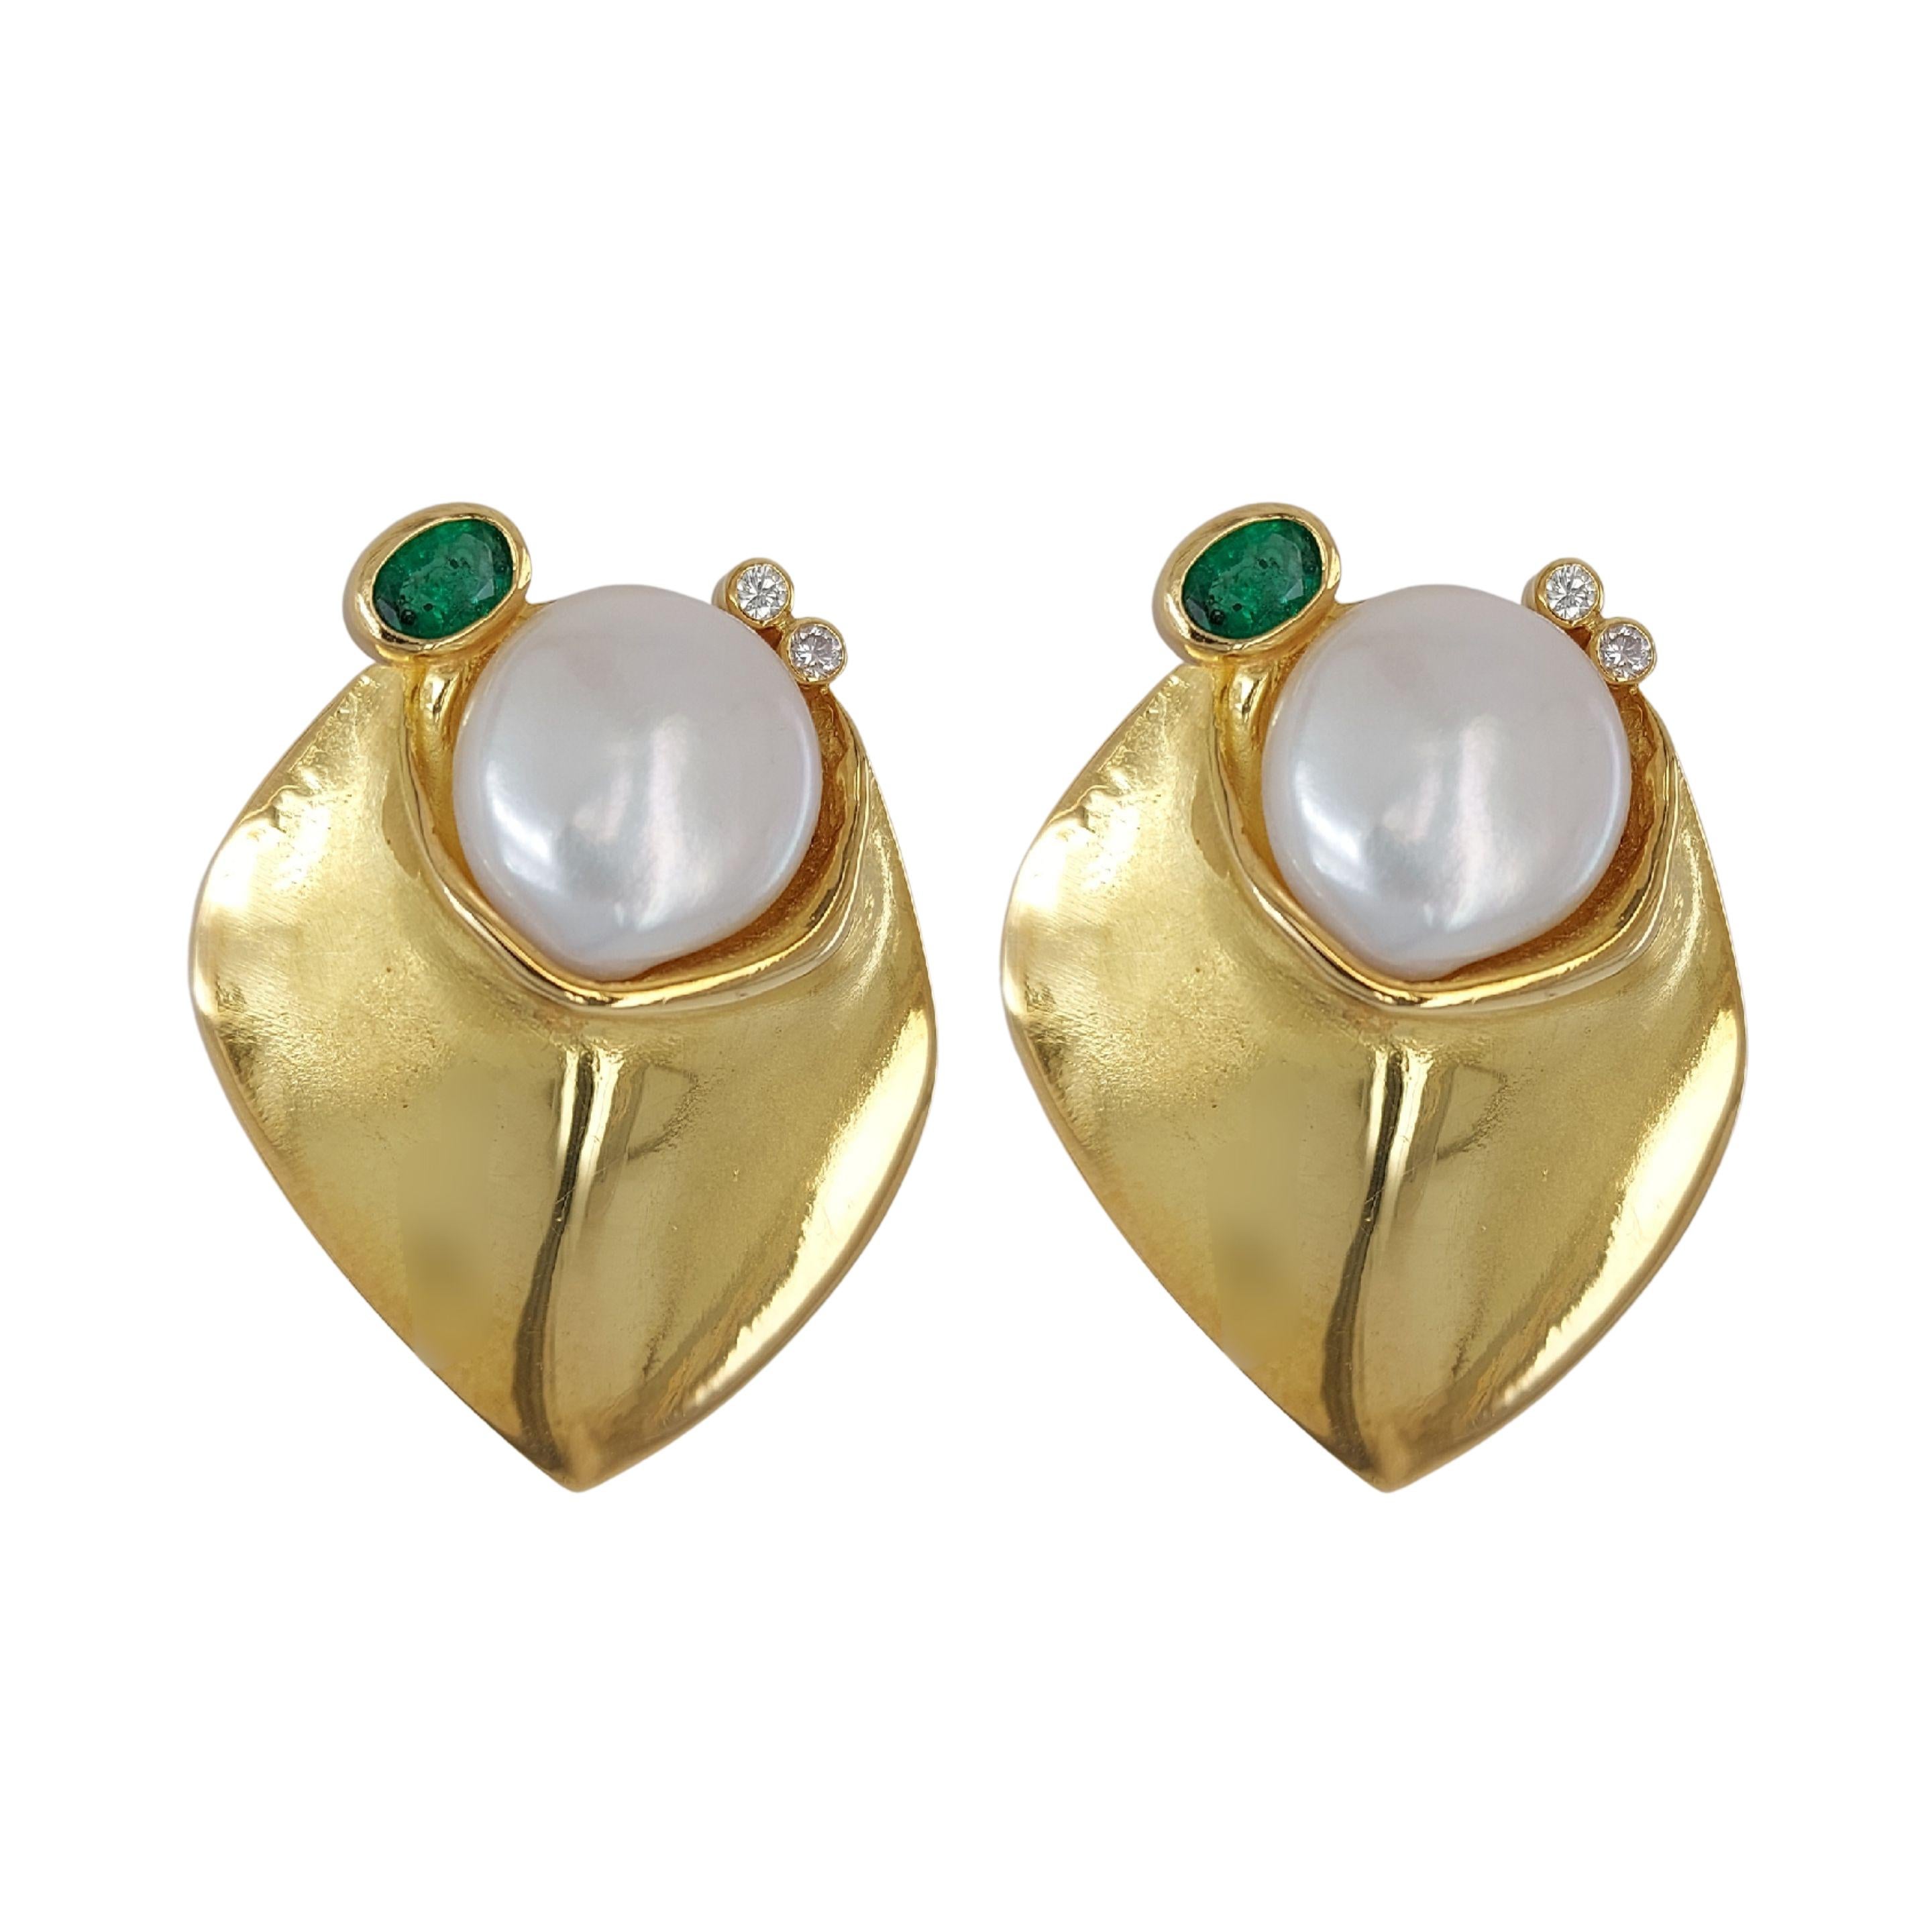 Brilliant Cut De Saedeleer 18kt Yellow Gold Clip-On Earrings with Diamond, Emerald, Pearl For Sale